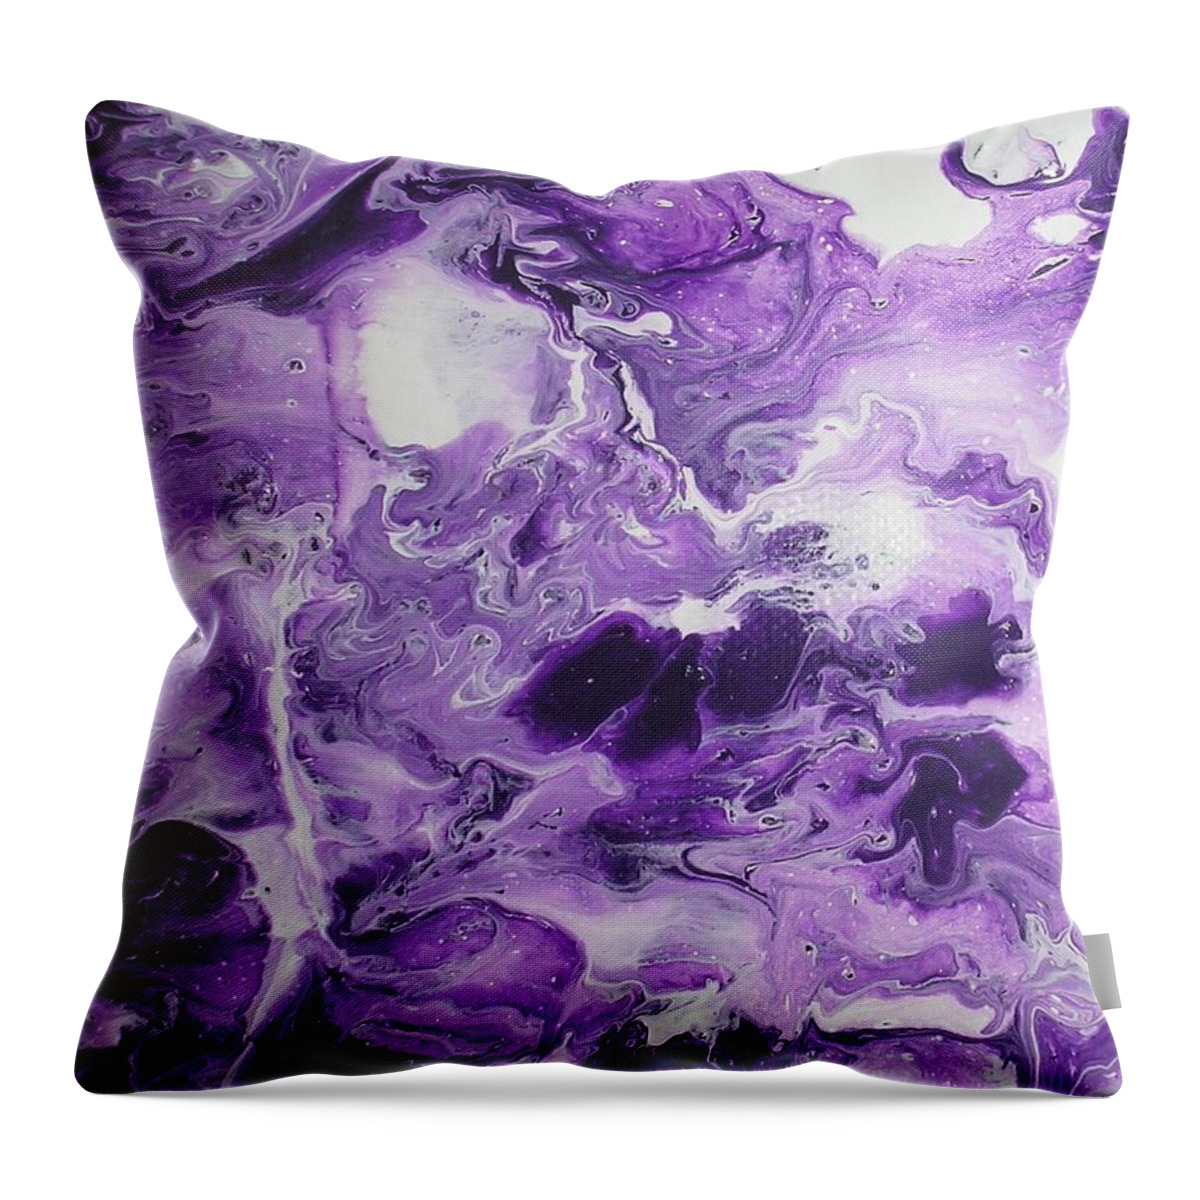 Purple Abstract Throw Pillow featuring the painting Purple Chaos Abstract 1 by Karen Jane Jones